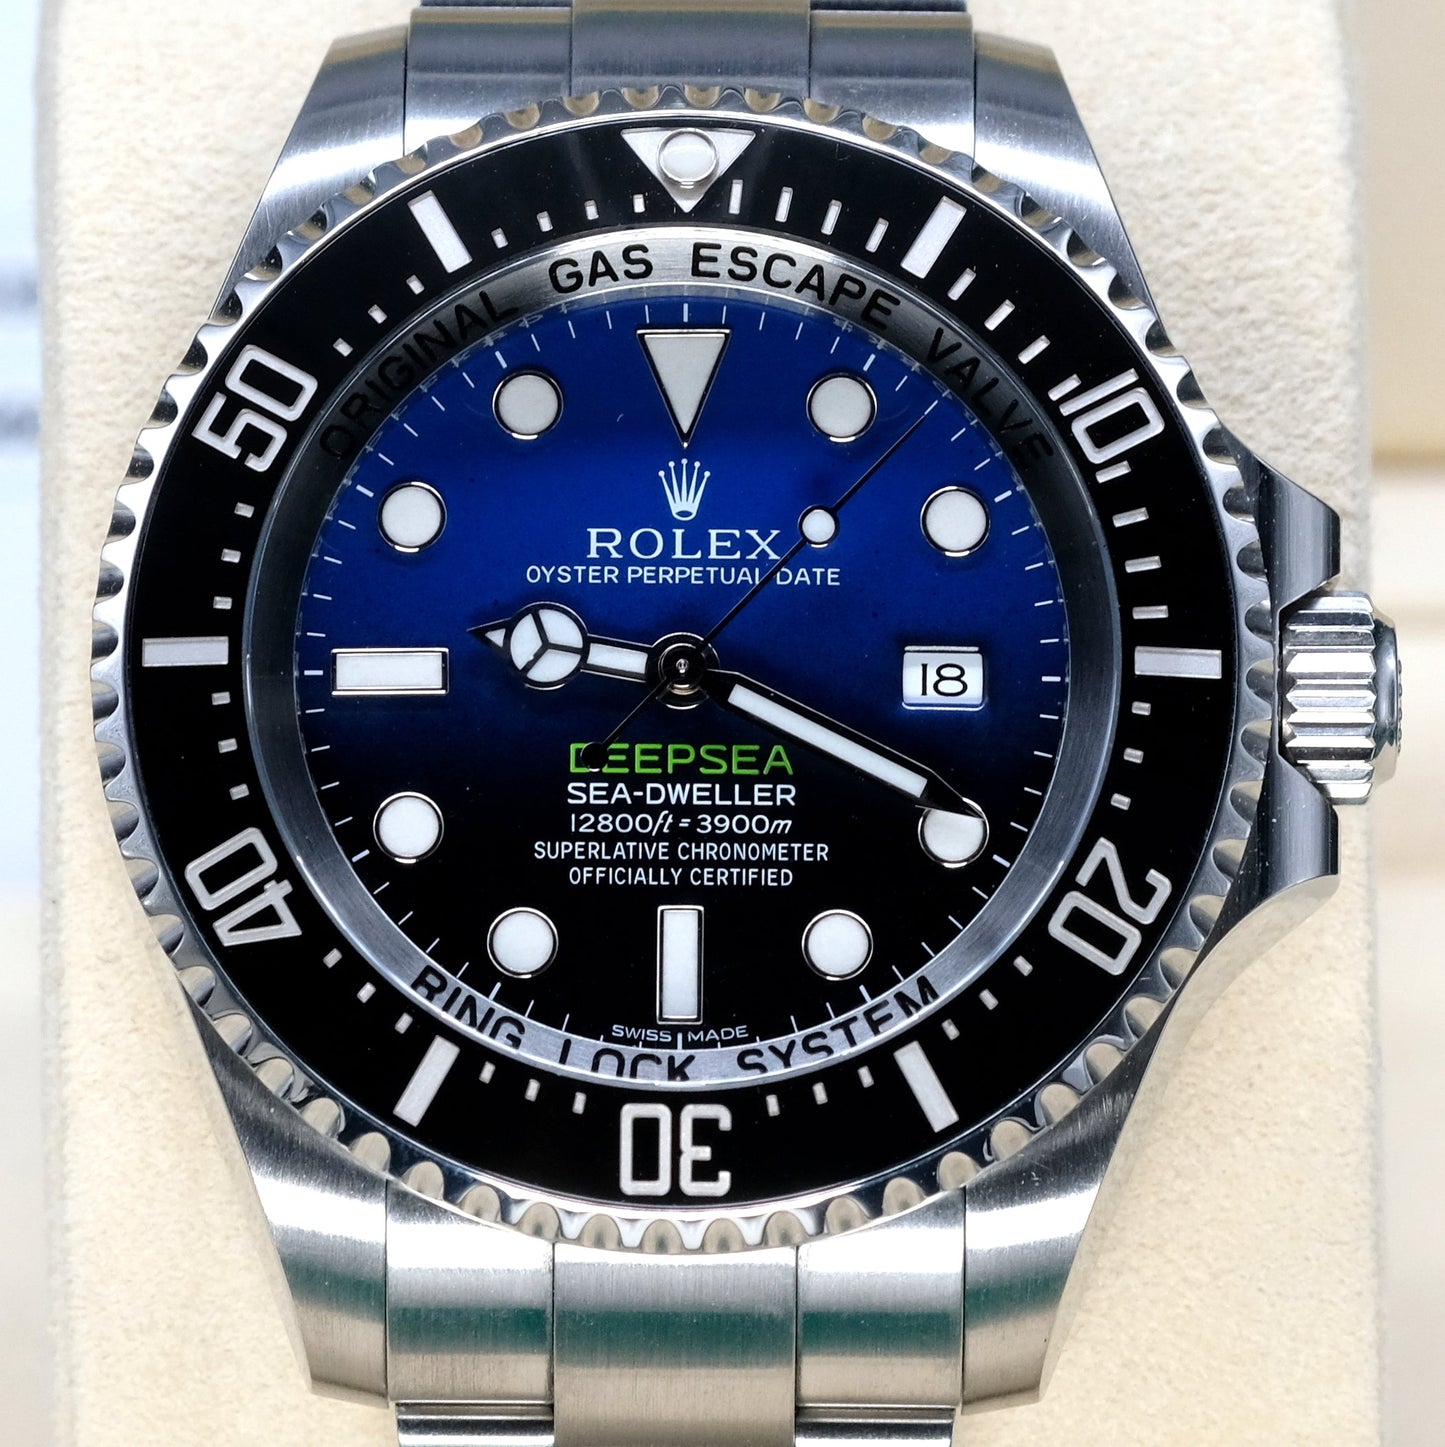 [Pre-Owned Watch] Rolex Deepsea 44mm 116660 D-Blue Dial (888) (Out of Production)